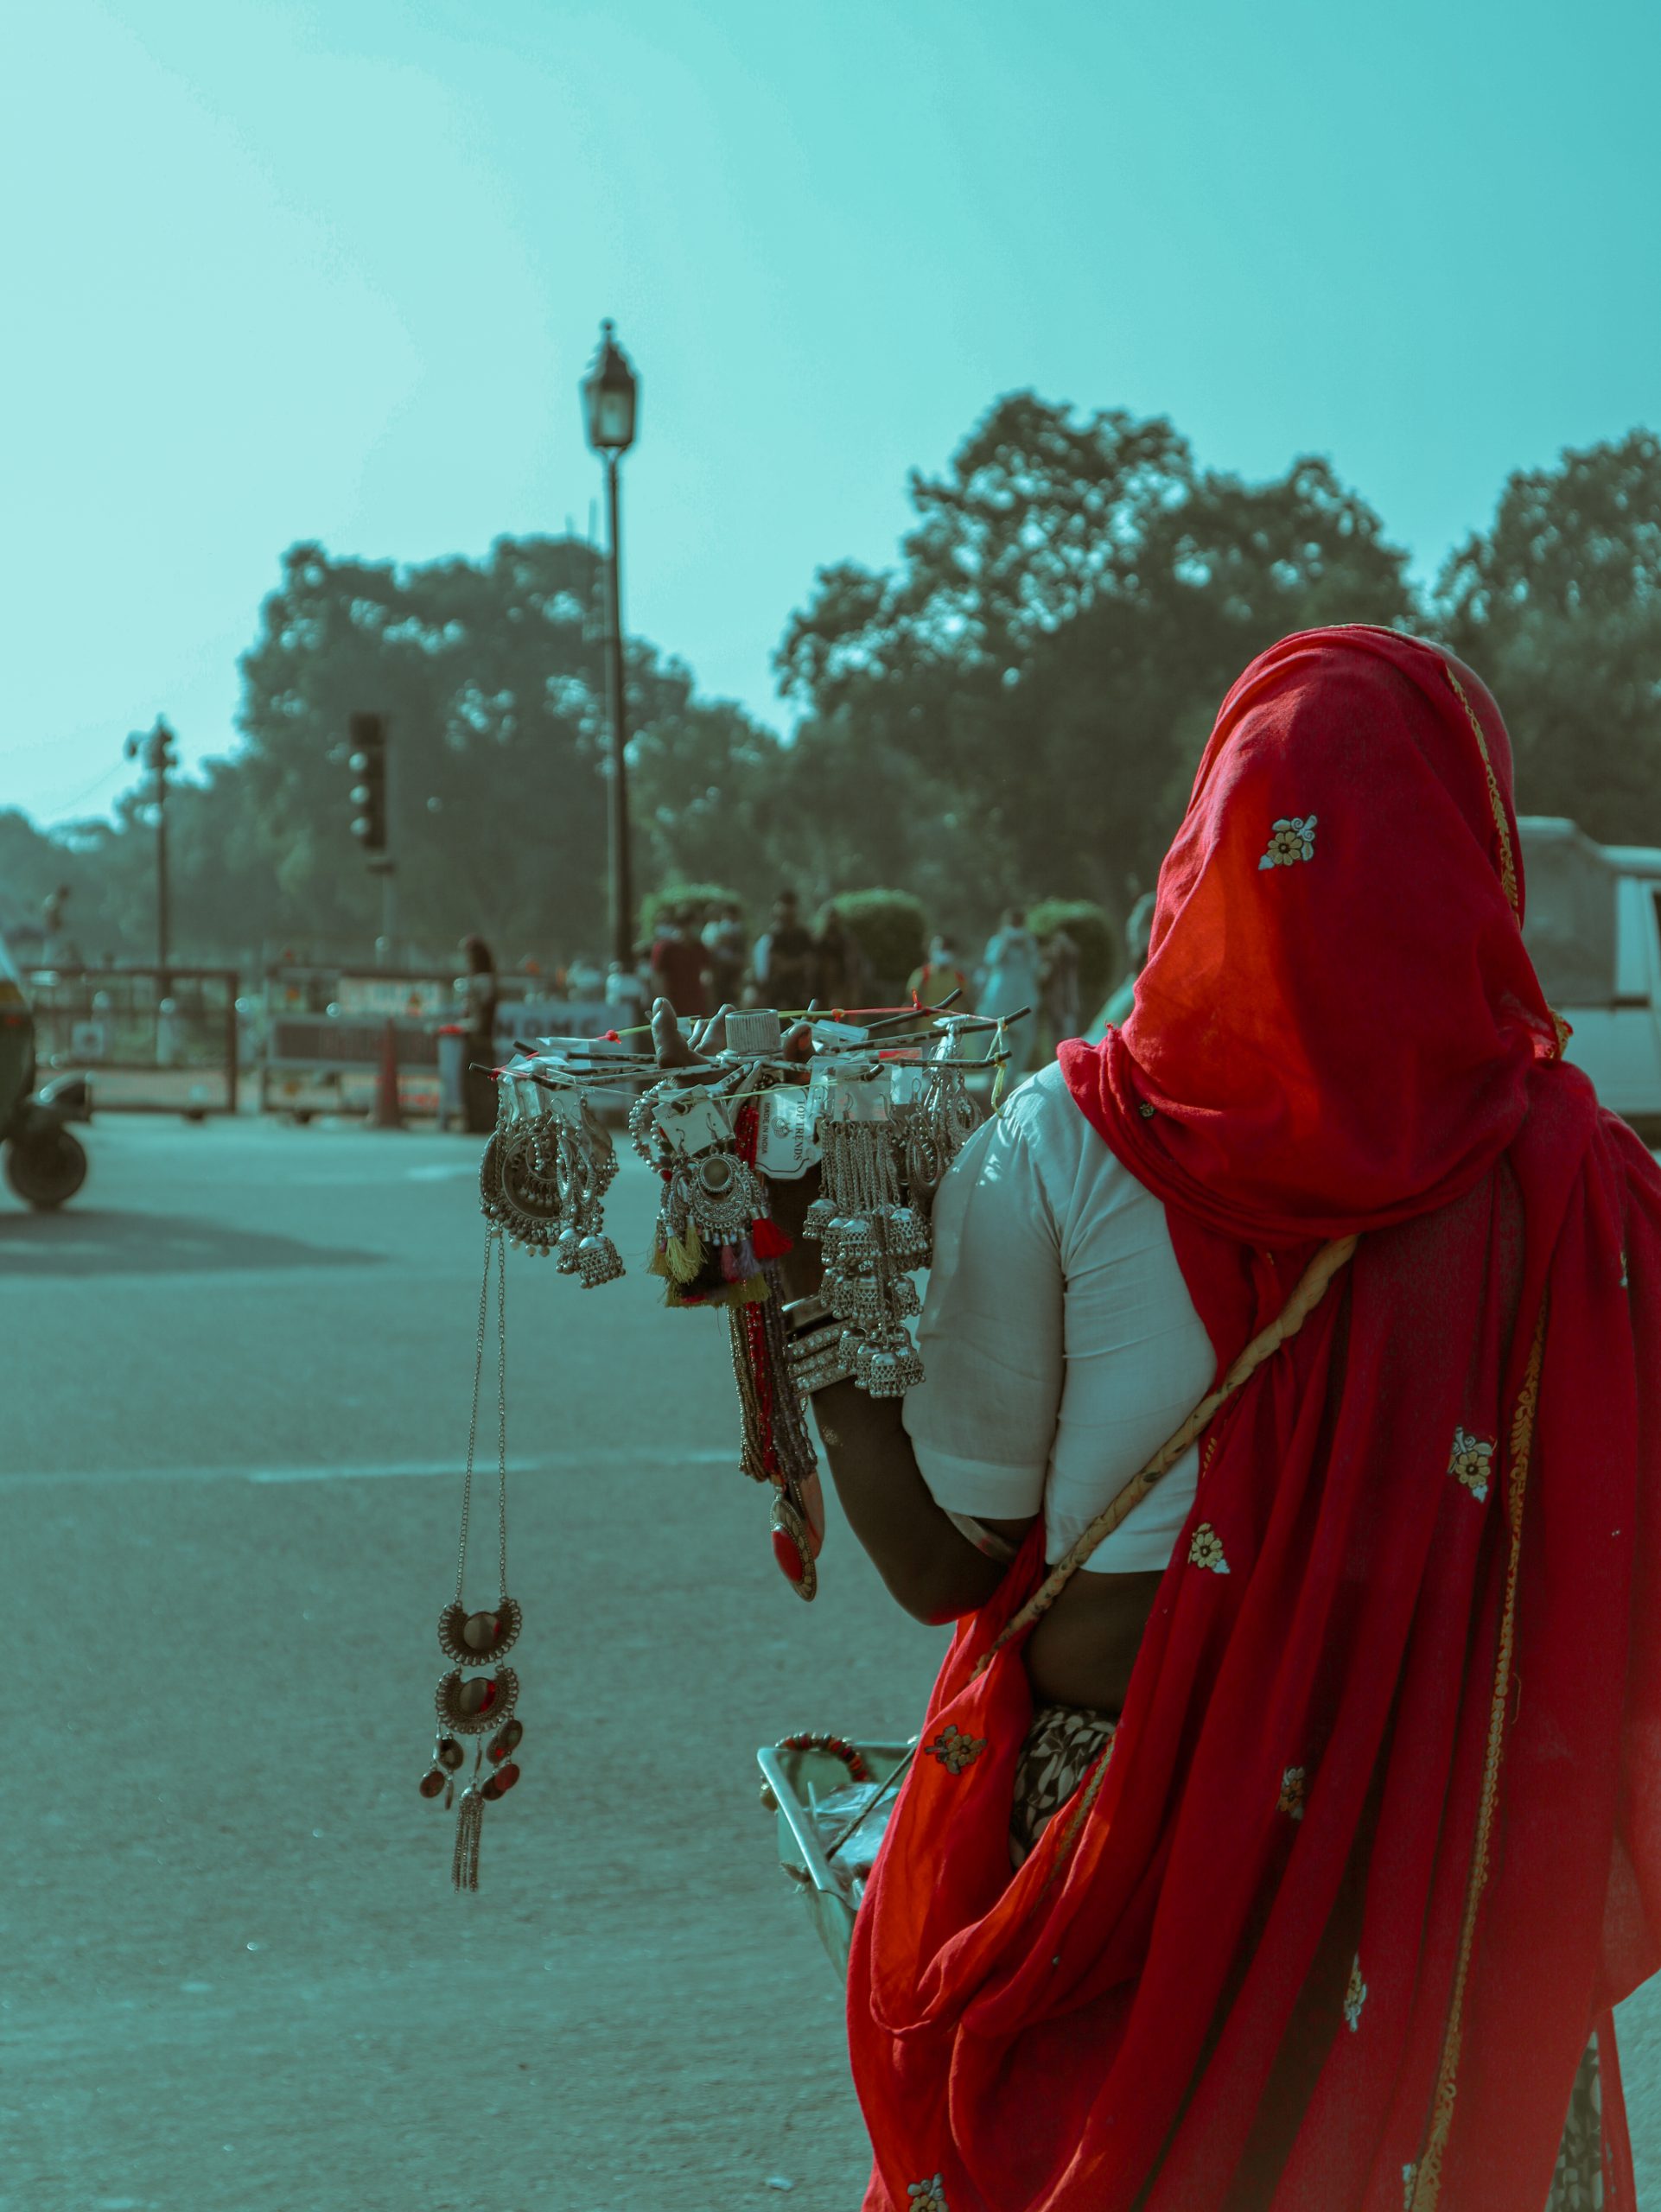 A lady selling goods in Delhi